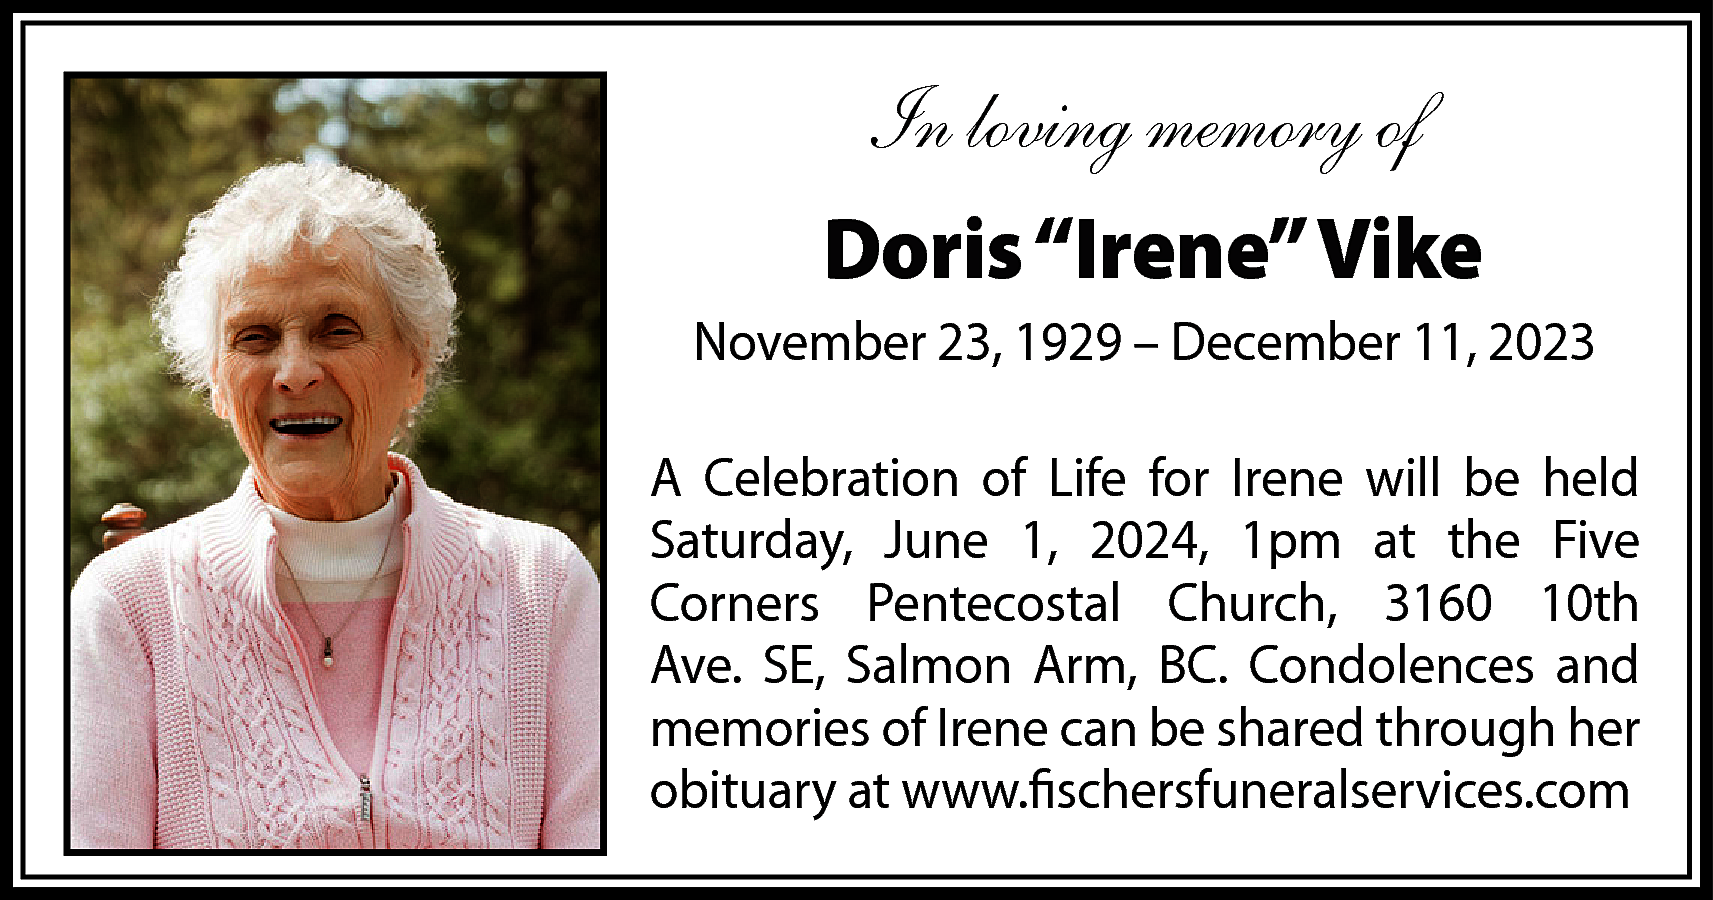 In loving memory of <br>Doris  In loving memory of  Doris “Irene” Vike  November 23, 1929 – December 11, 2023  A Celebration of Life for Irene will be held  Saturday, June 1, 2024, 1pm at the Five  Corners Pentecostal Church, 3160 10th  Ave. SE, Salmon Arm, BC. Condolences and  memories of Irene can be shared through her  obituary at www.fischersfuneralservices.com    